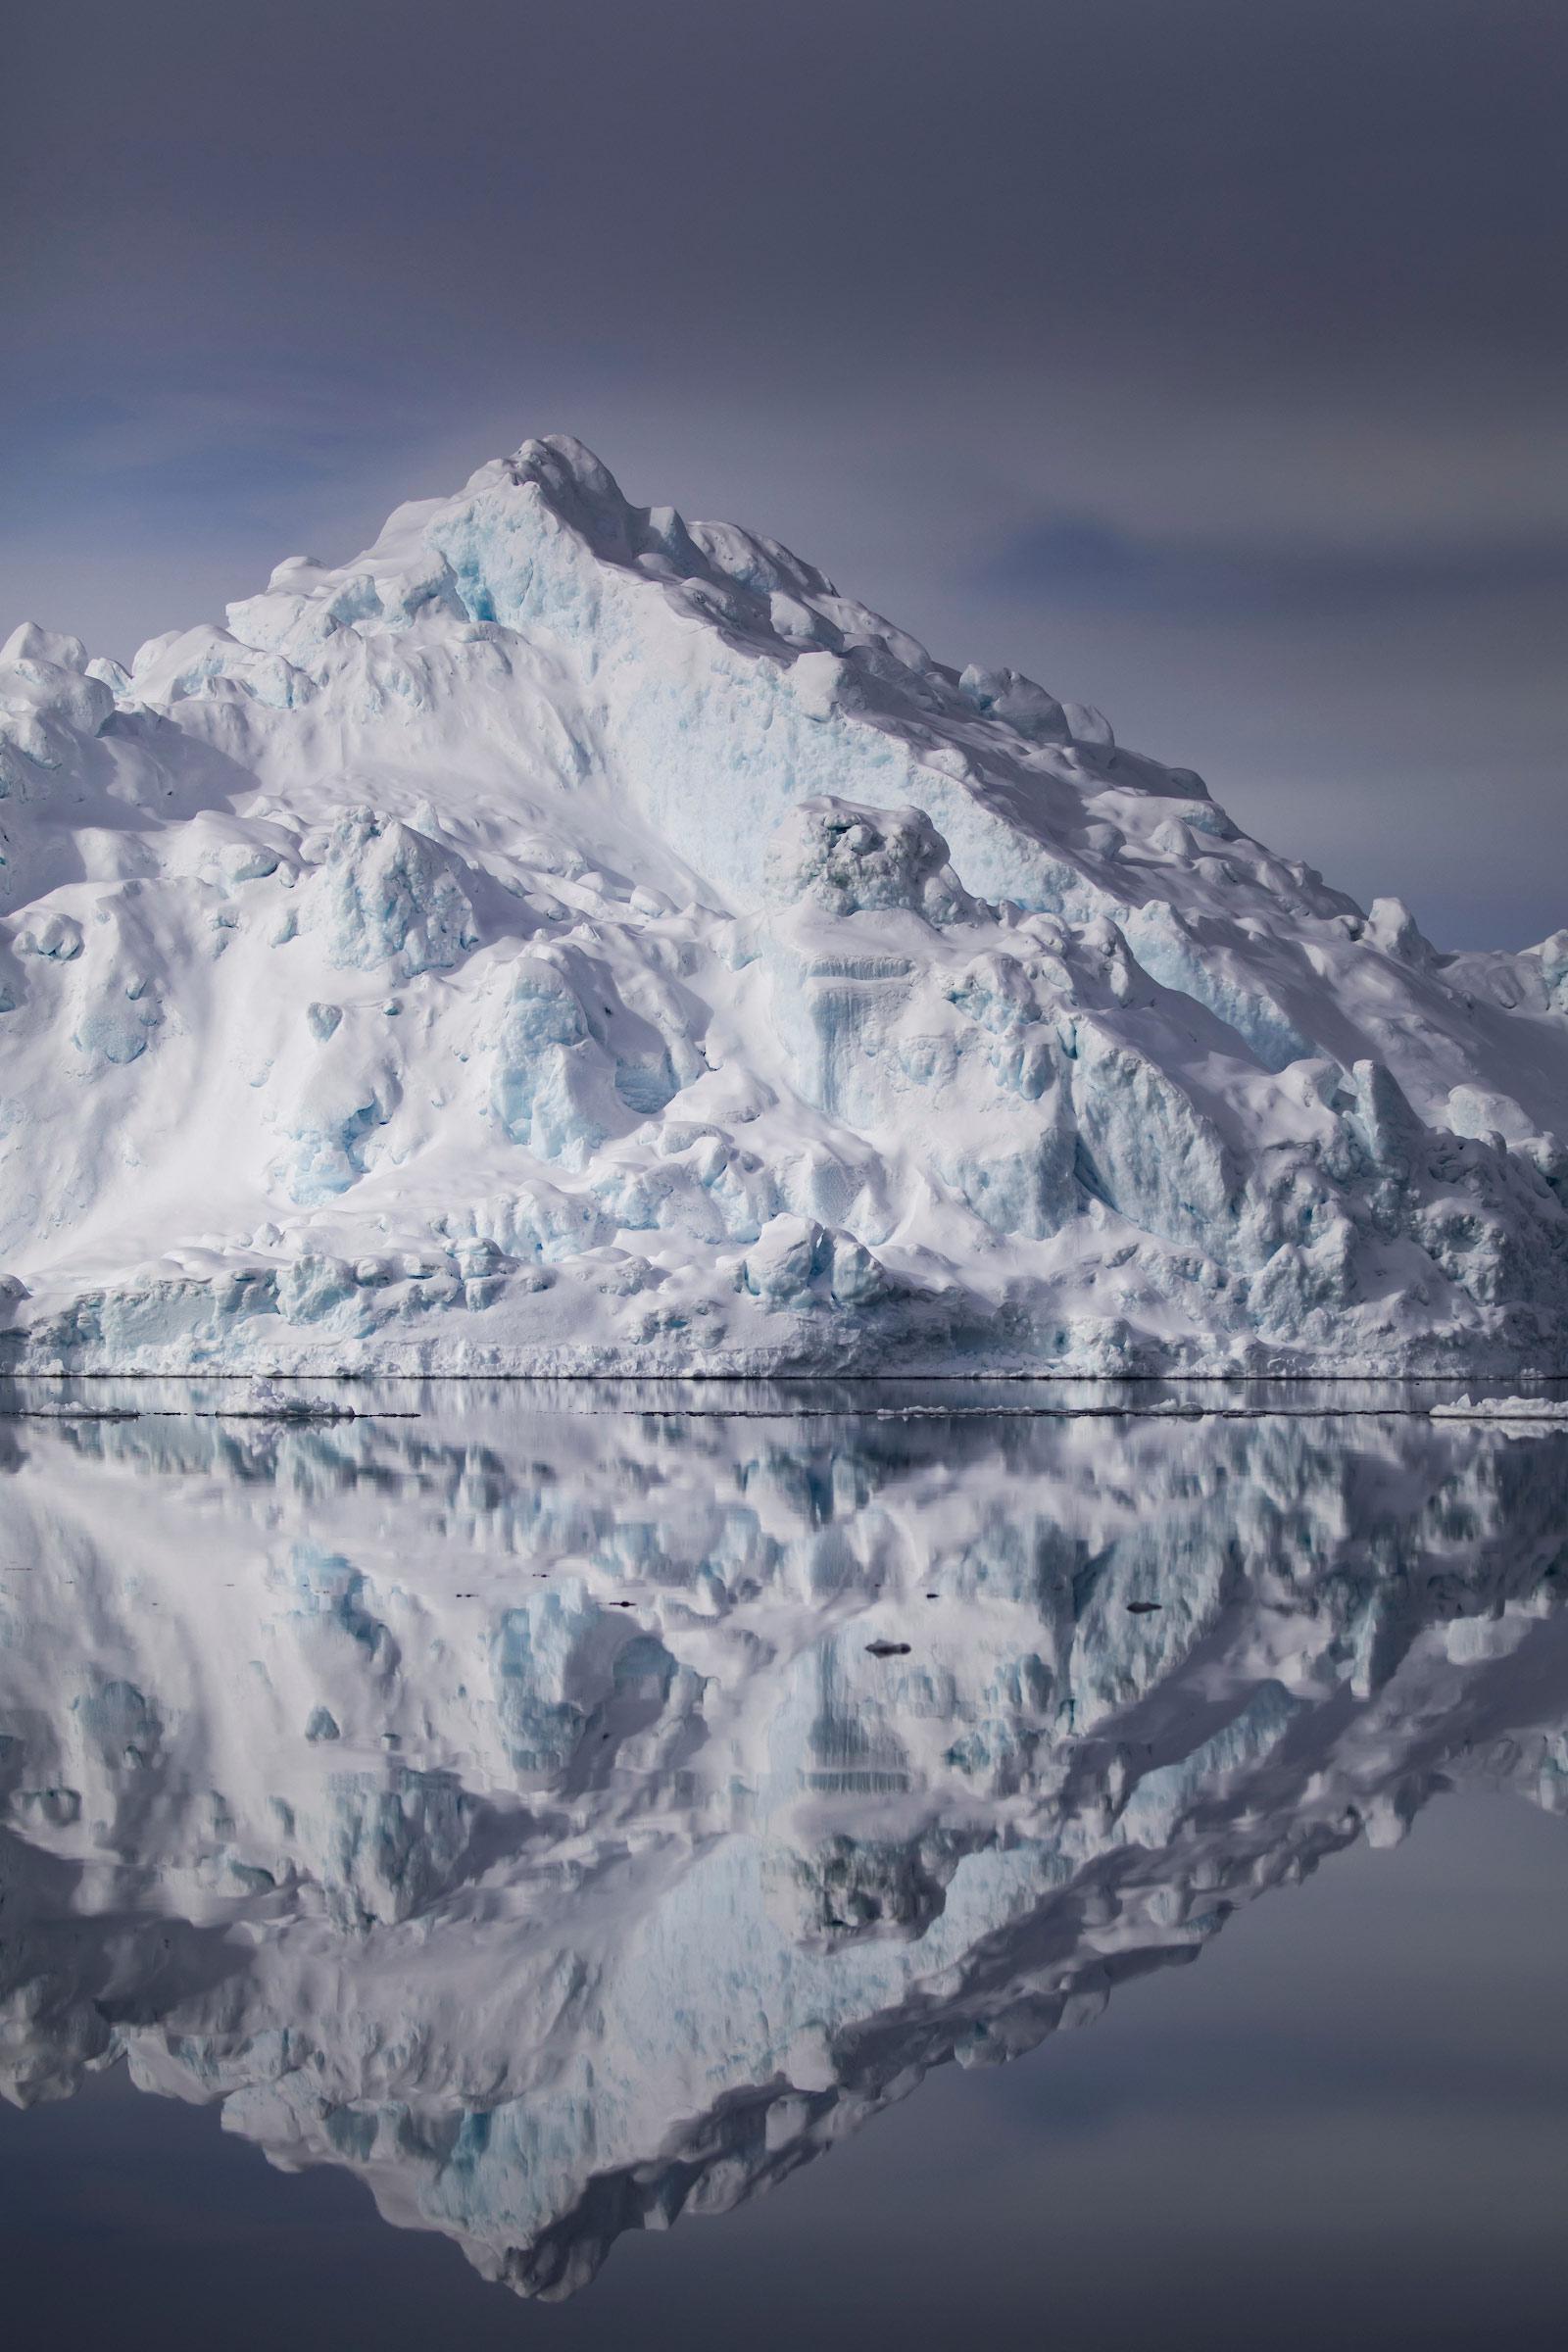 Clear reflection of the ice. Photo by Aningaaq Rosing Carlsen - Visit Greenland